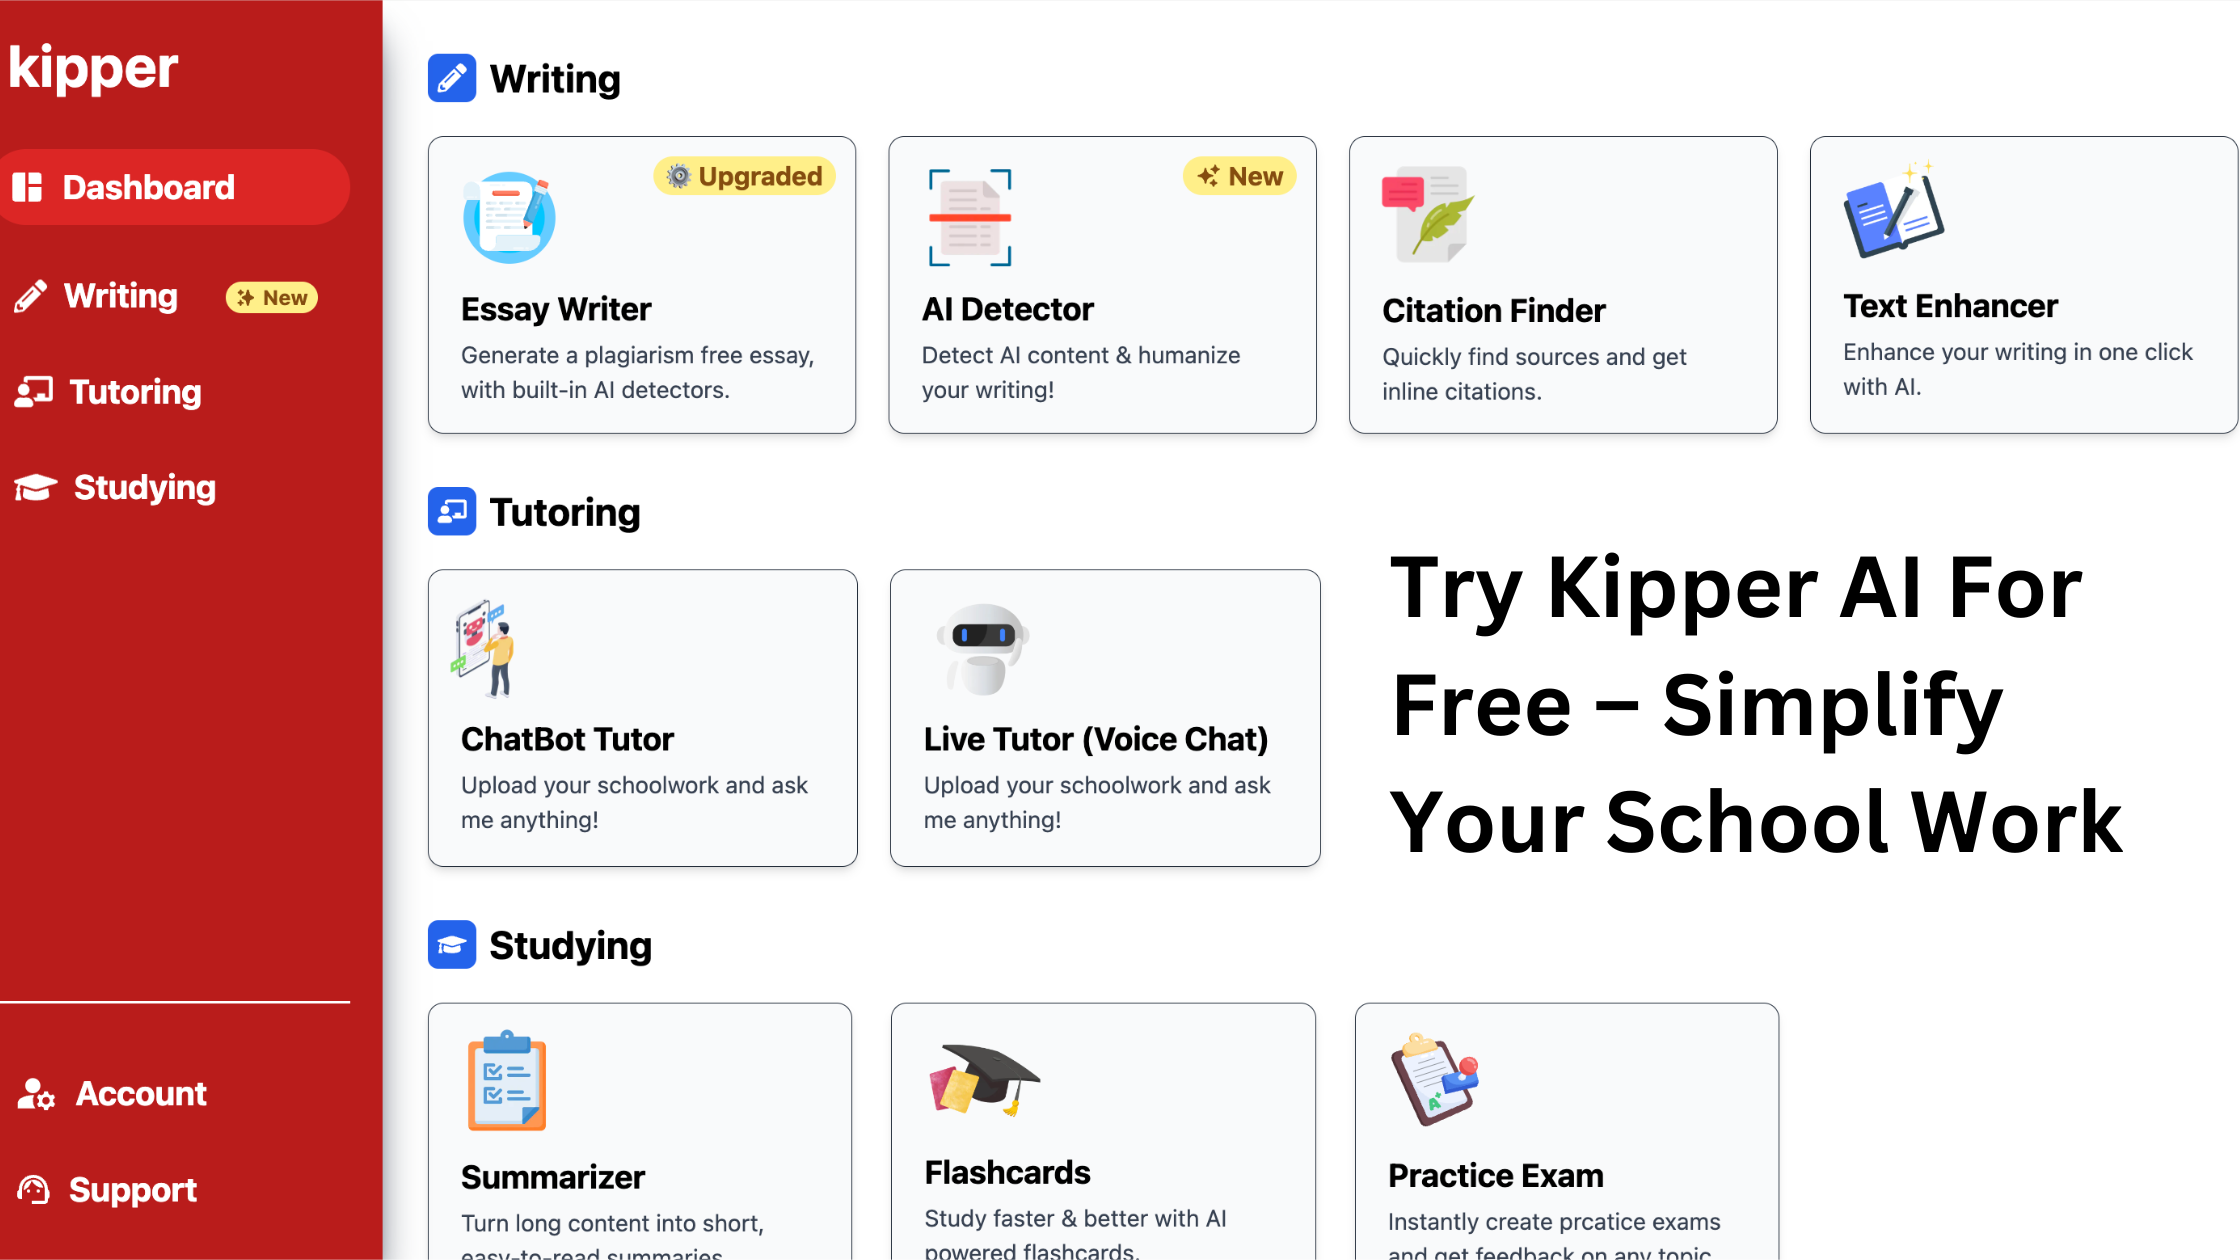 Try Kipper AI For Free – Simplify Your School Work 